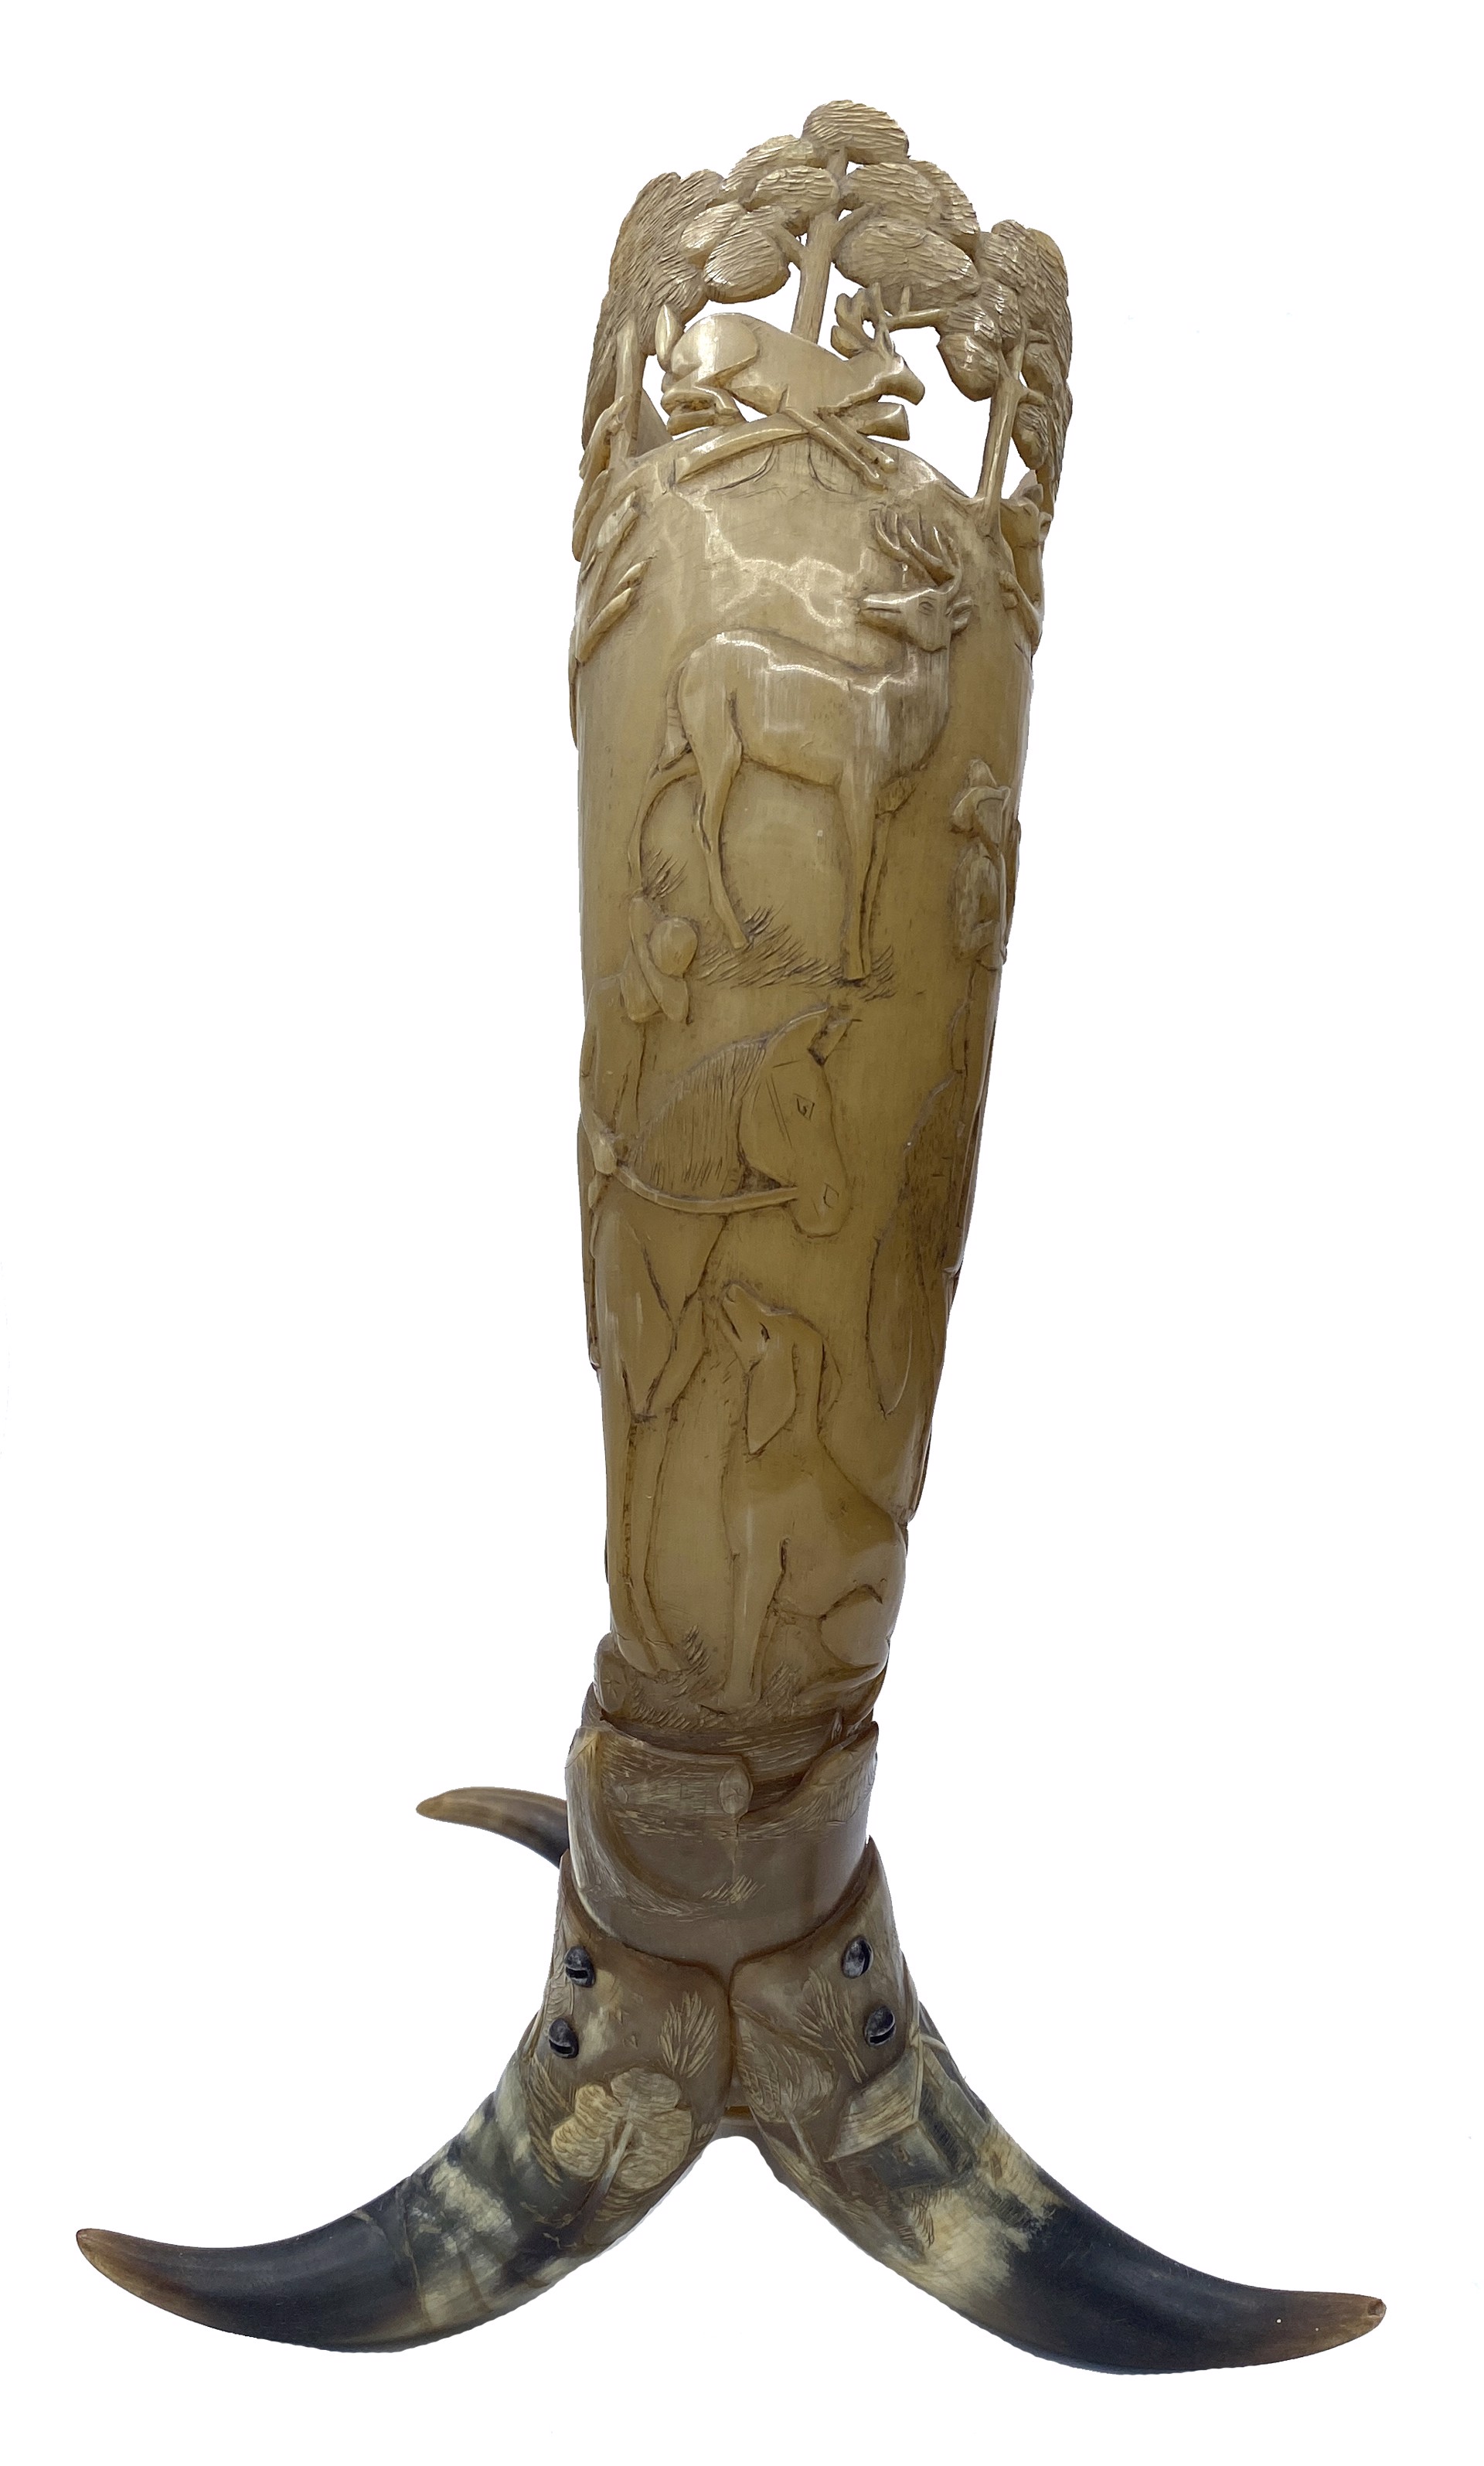 DS-84: carved powder horn on three horn legs; main horn depicts pastoral farm scene with horse and rider, dog, deer and dog hunting scene, with trees encircling the rim of cup; two legs show homestead scene in landscape, third leg has coiled snake form by Dan Super